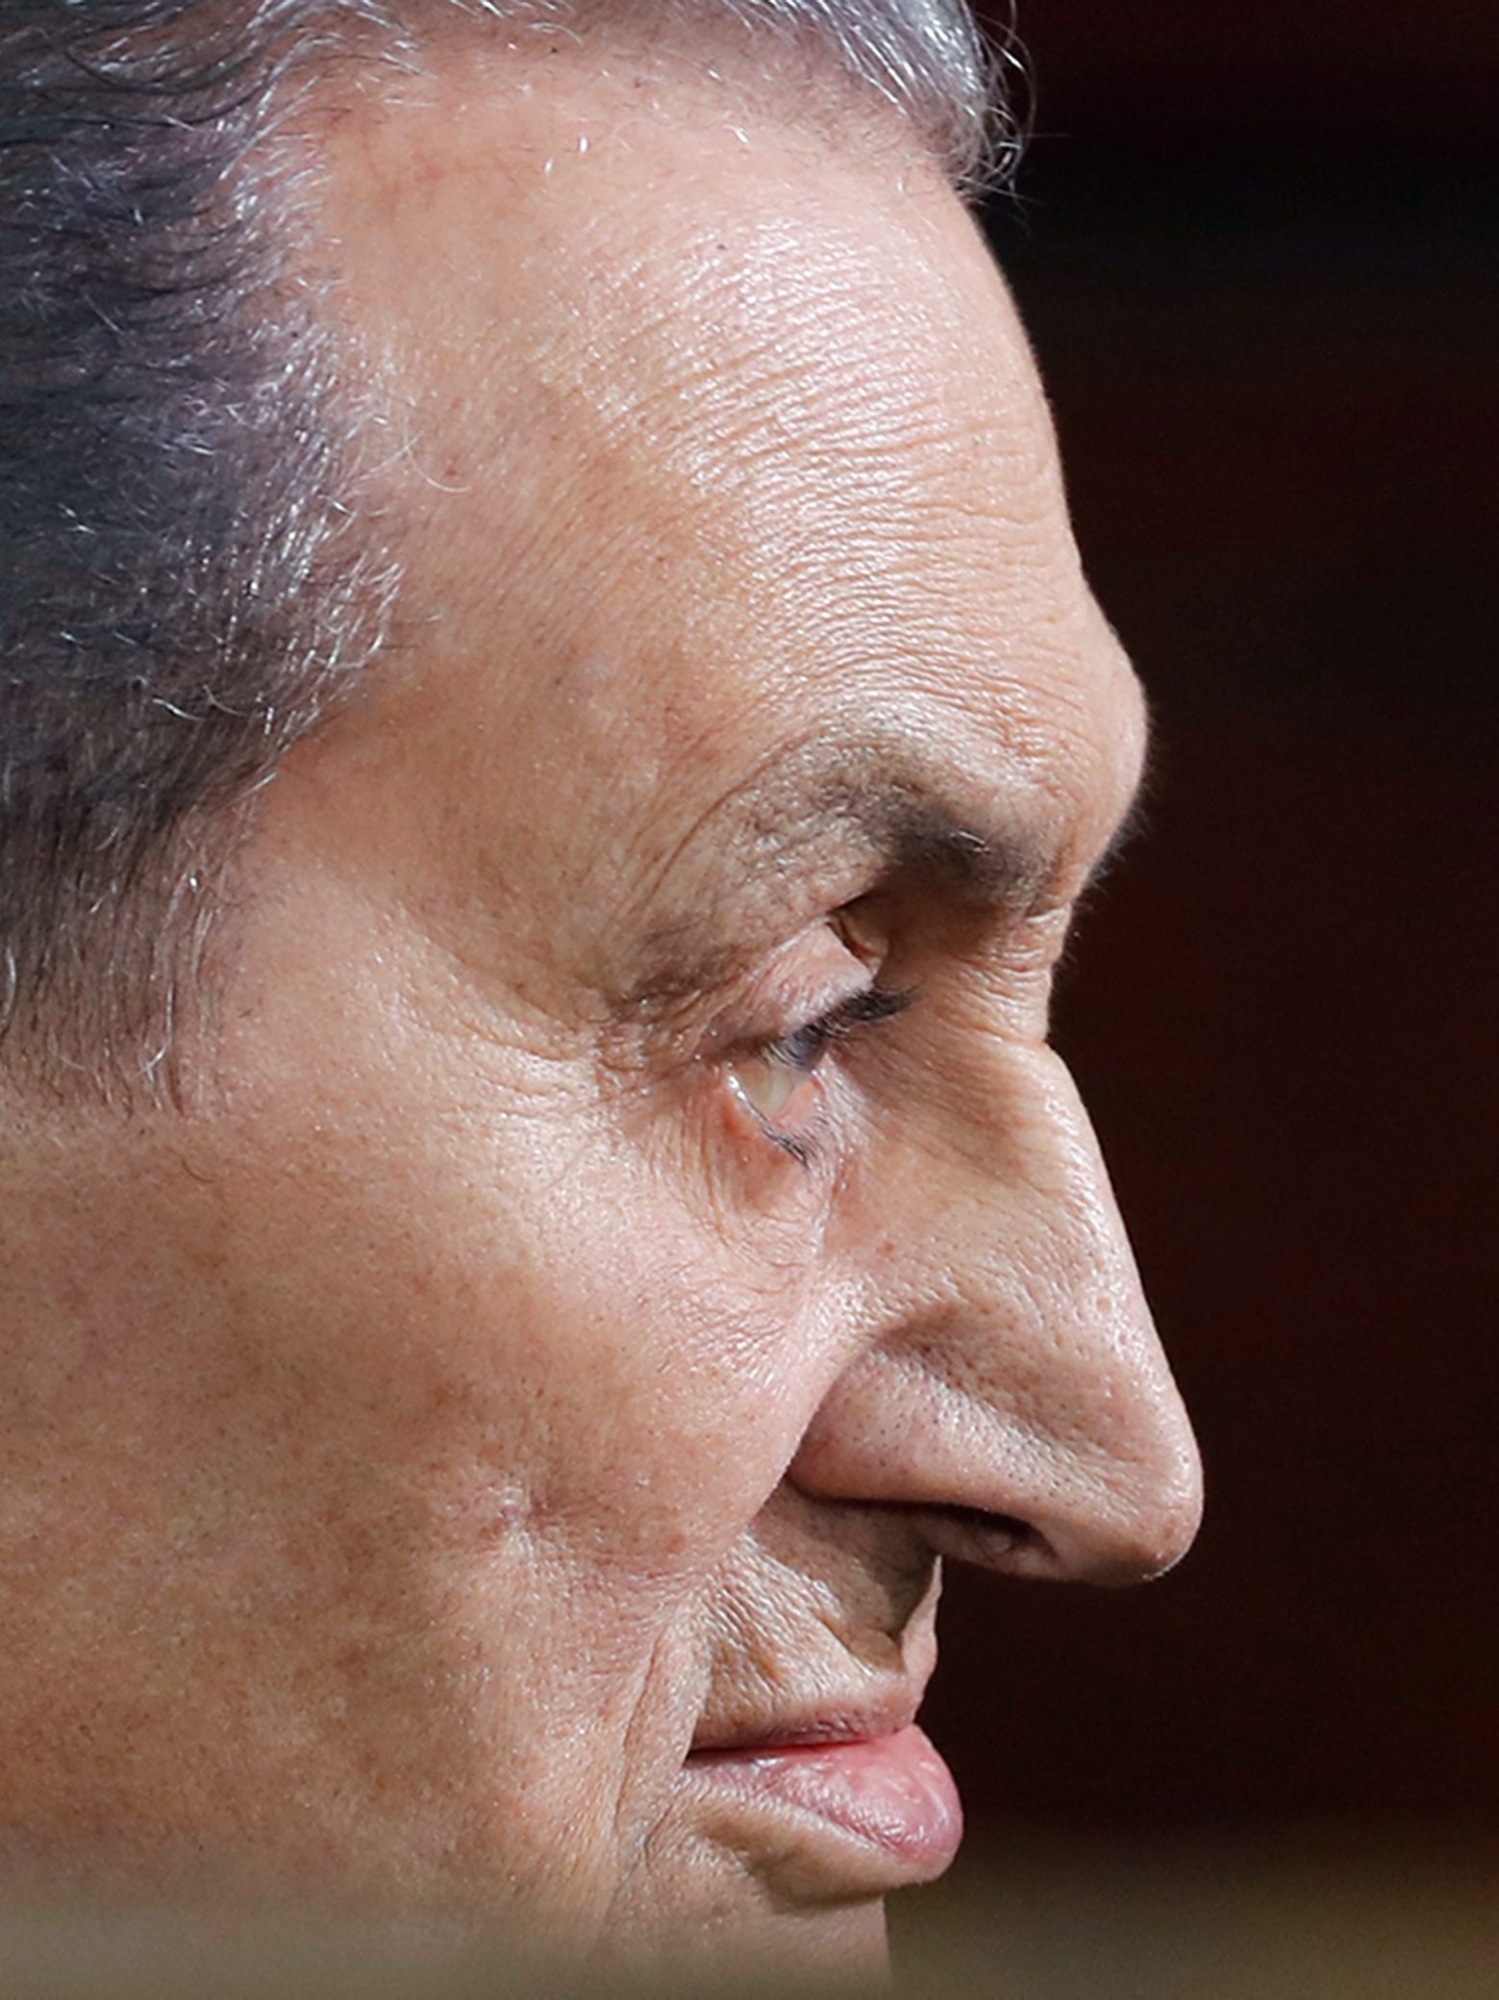 epa08246266 (FILE) - Former Egyptian President Hosni Mubarak testifies in a case related to a 2011 prison break, at a courthouse in Cairo, Egypt, 26 December 2018 (reissued 25 February 2020). According to media reports on 25 February 2020, Former Egyptian President Hosni Mubarak has died aged 92. Hosni Mubarak ruled Egypt from October 1981 till January 2011, and stepped down of the presidency after the 18-days Egyptian revolution of 2011.  EPA/MOHAMED HOSSAM (FILE) EGYPT OBIT HOSNI MUBARAK